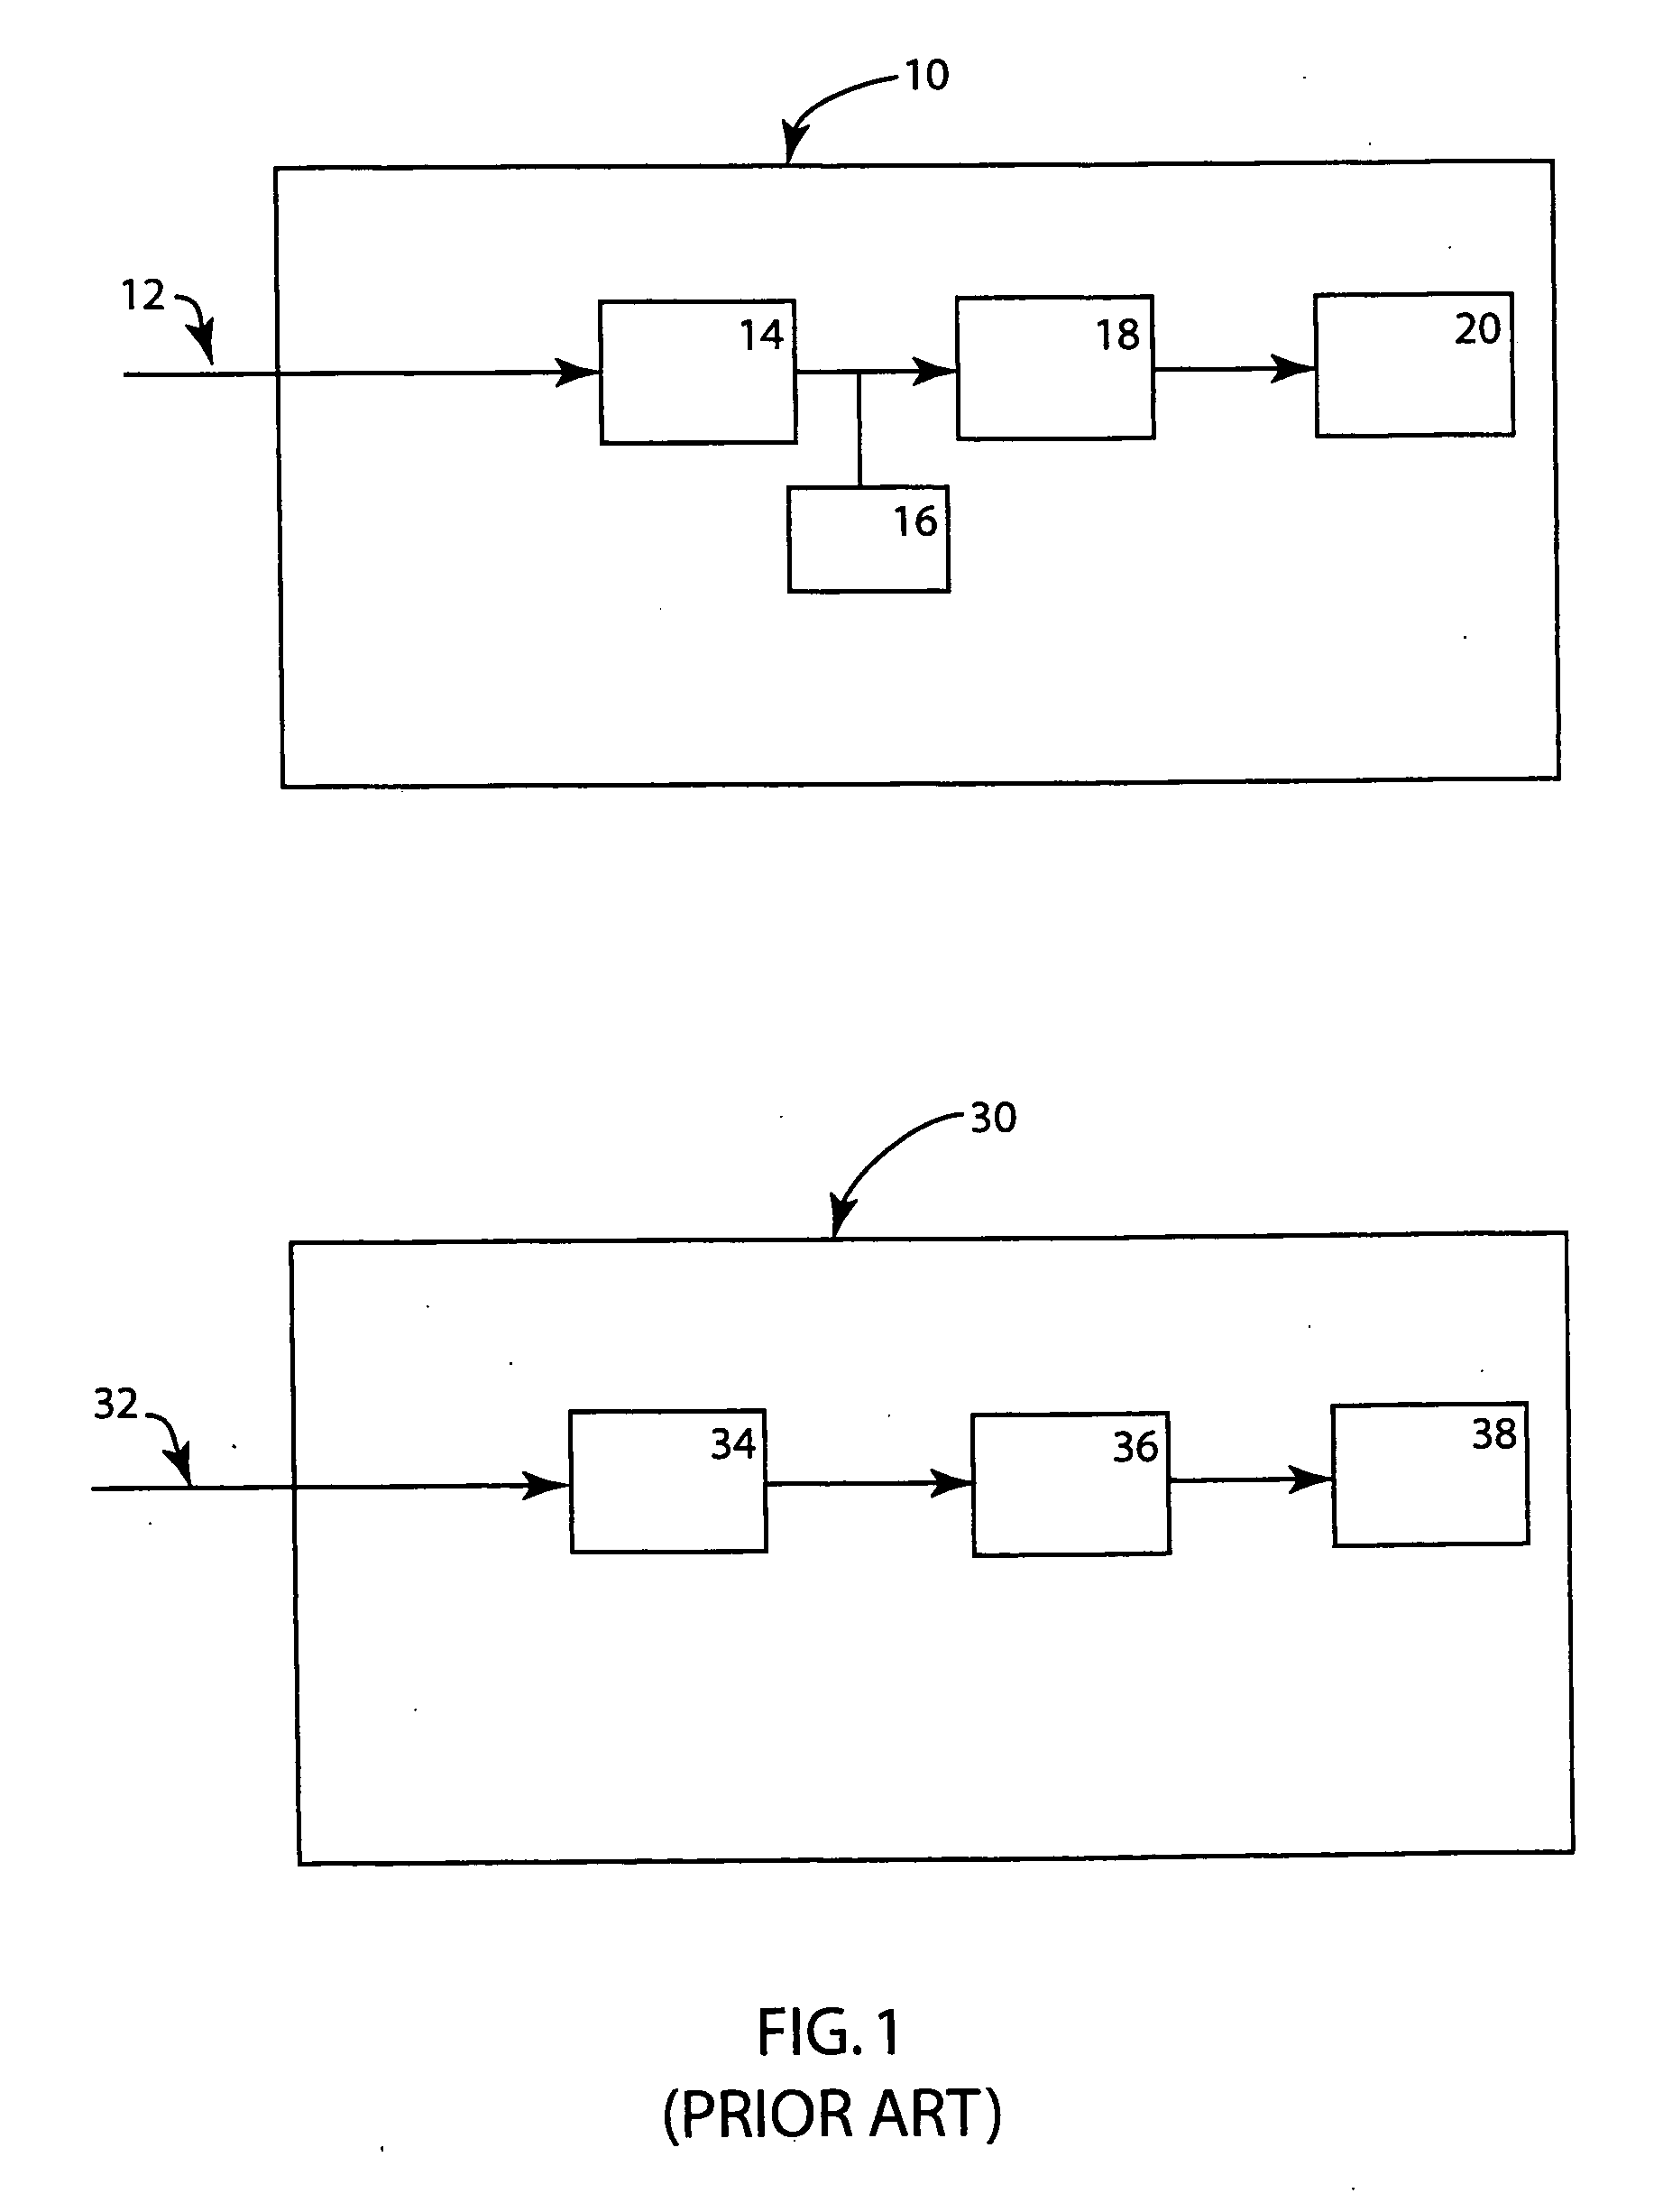 Method and system for providing auxiliary power for anesthesia delivery and patient monitoring